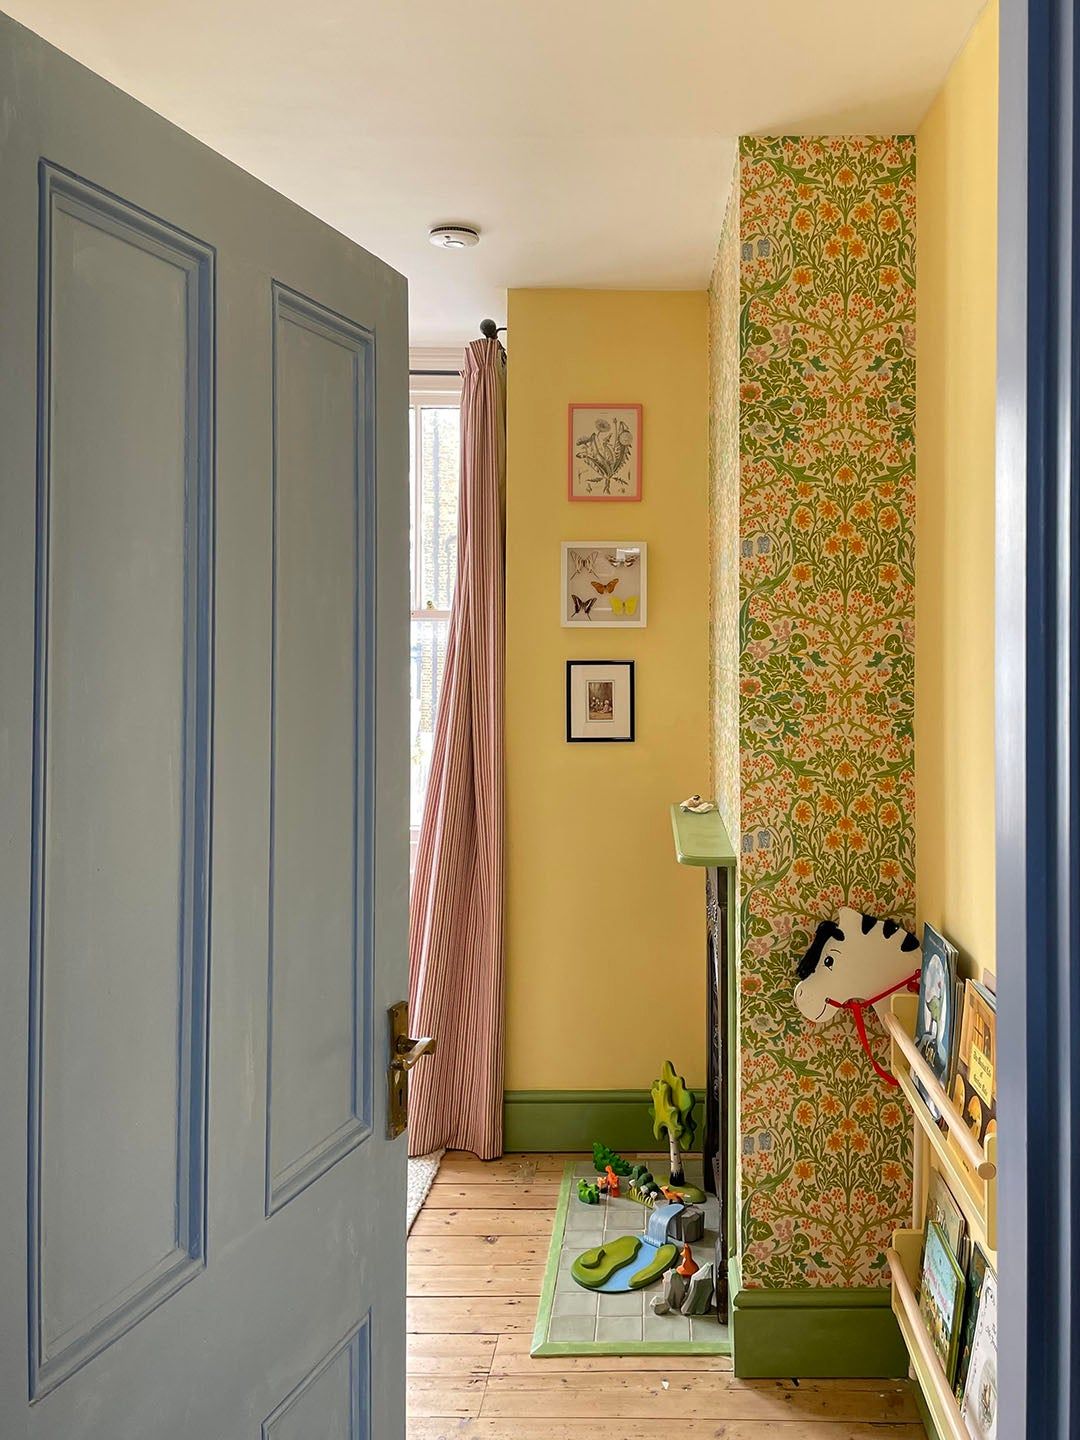 Yellow Curtains: Adding Sunshine to Your Space